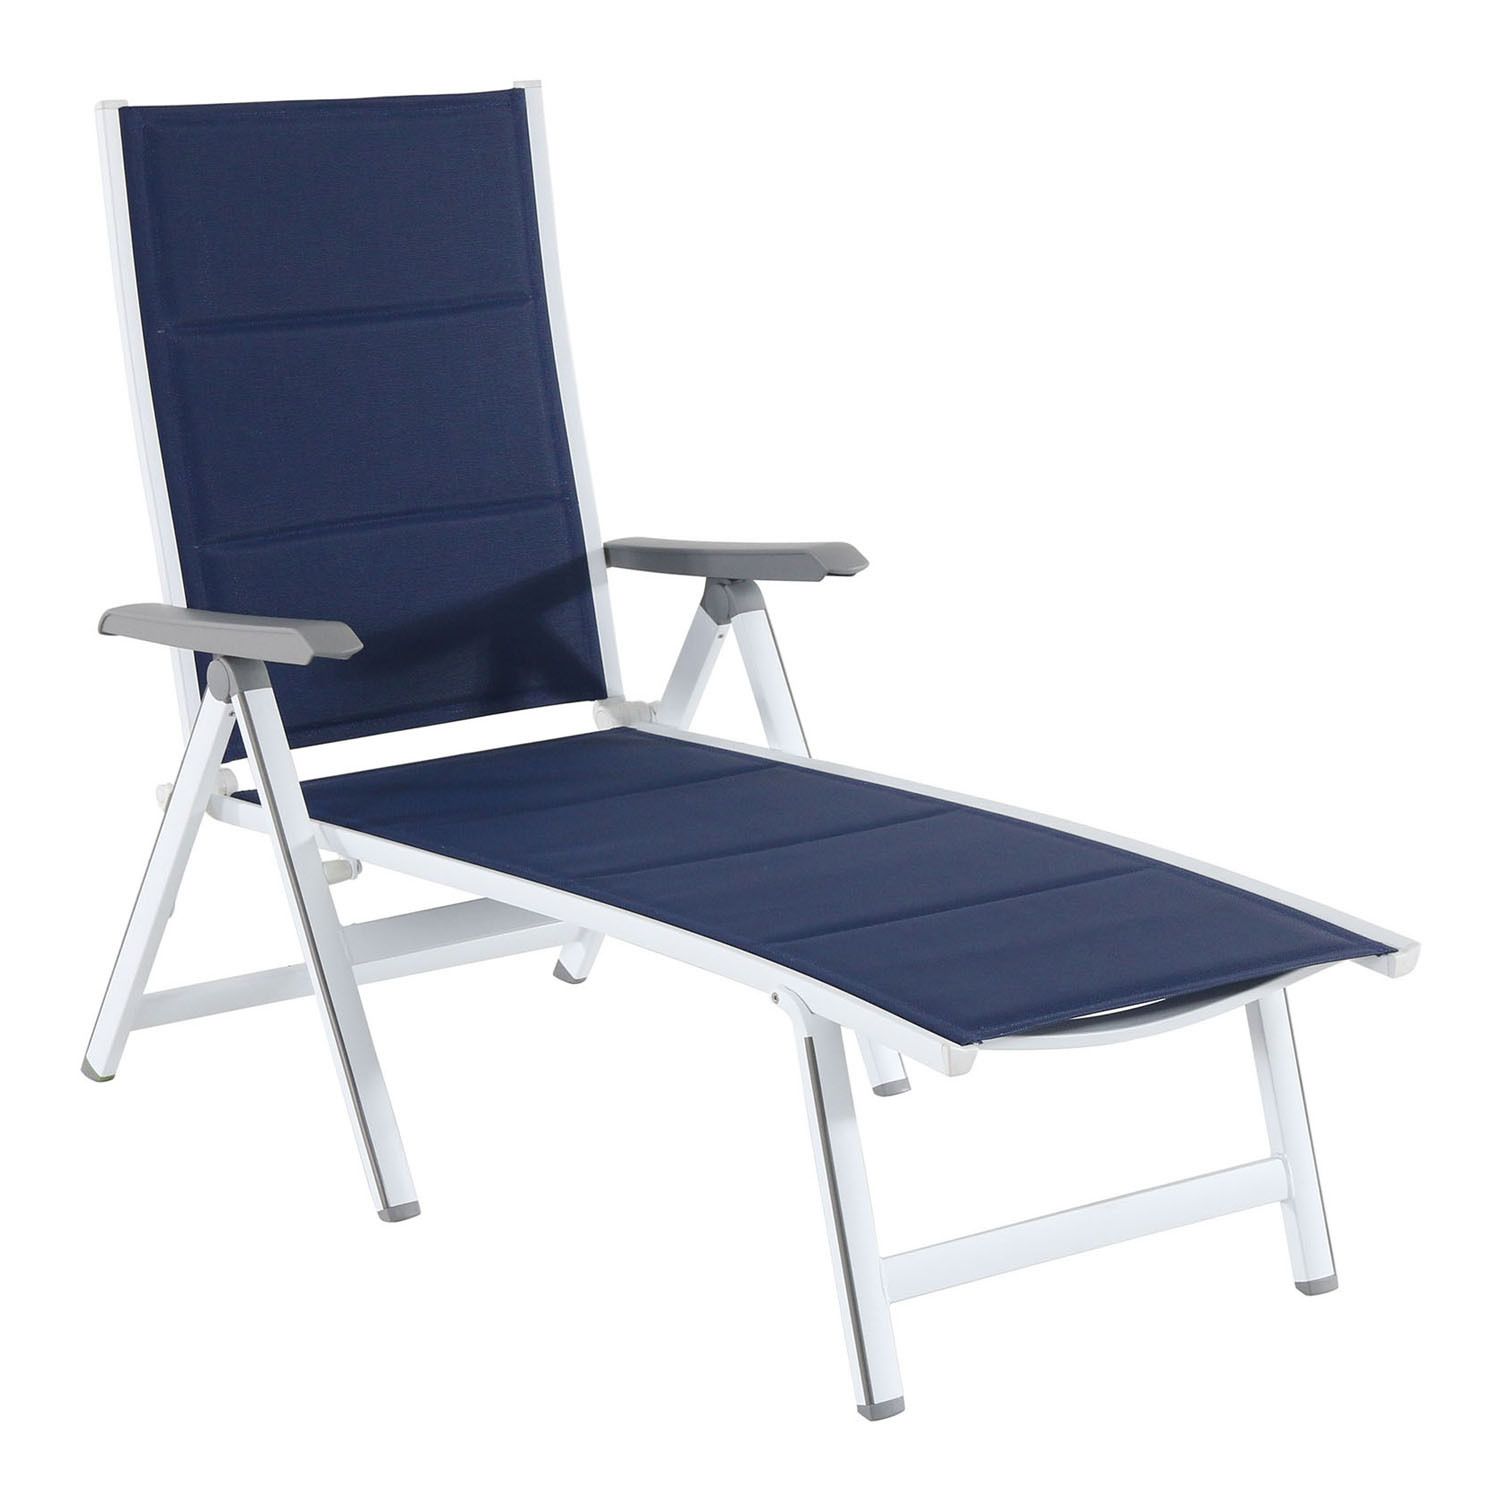 Image for Hanover Accessories Regis Padded Sling Chaise Patio Chair at Kohl's.